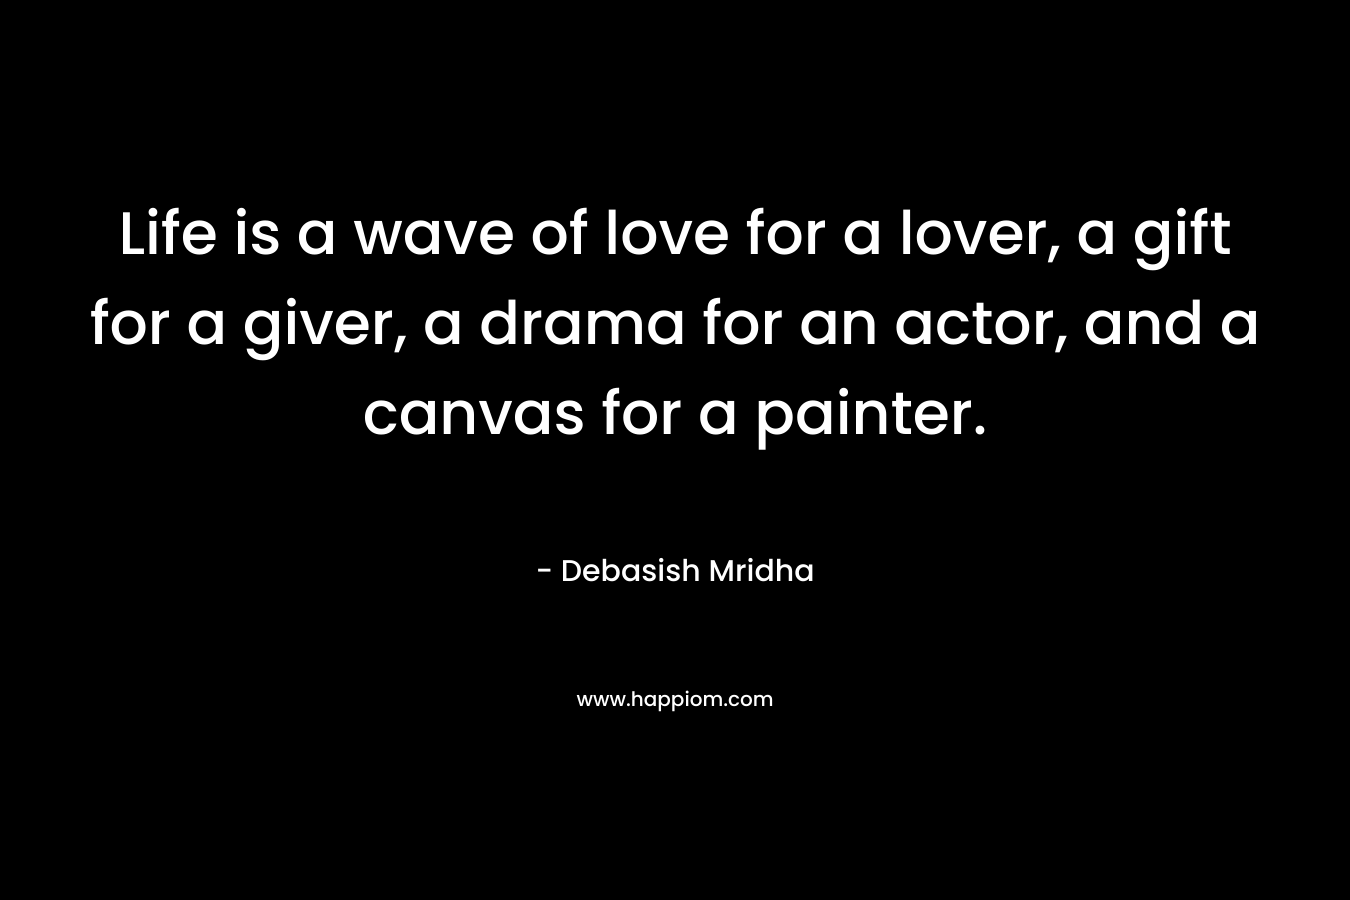 Life is a wave of love for a lover, a gift for a giver, a drama for an actor, and a canvas for a painter. – Debasish Mridha